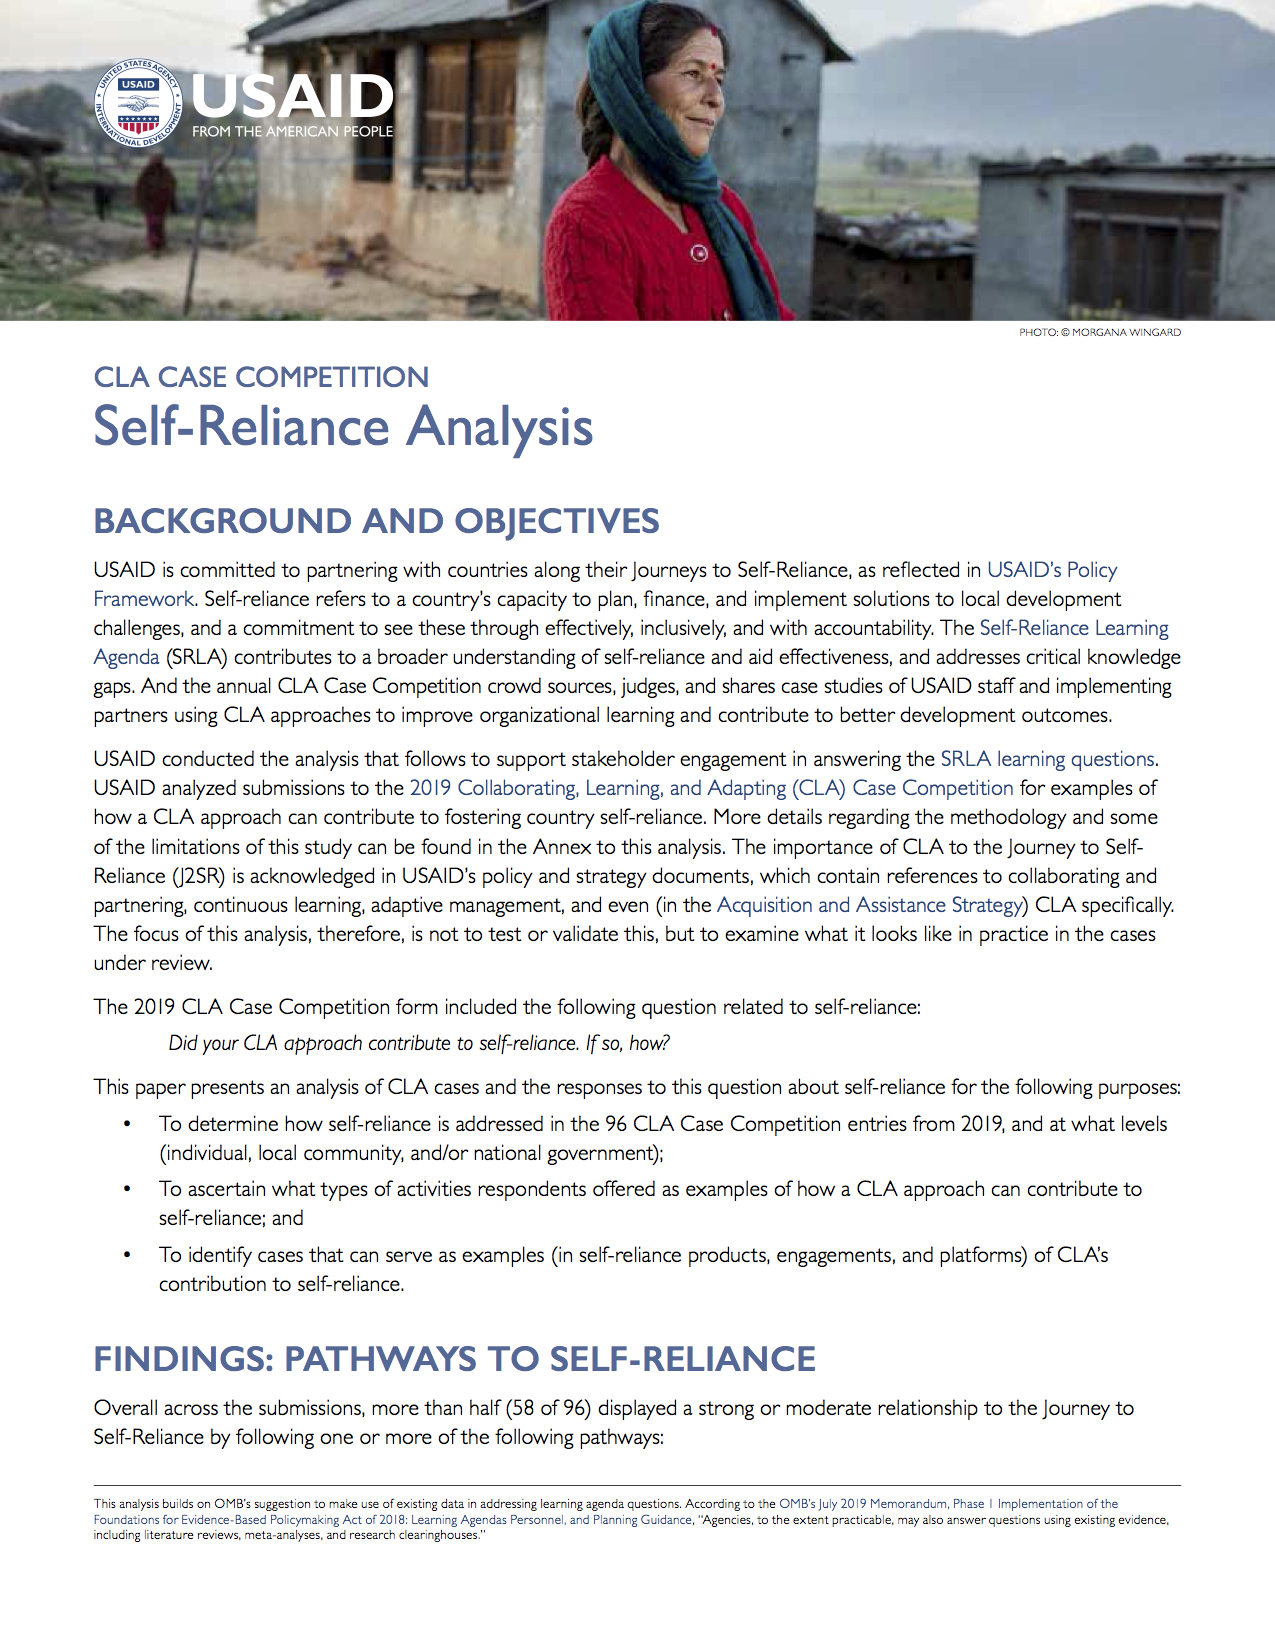 CLA Case Competition Self-Reliance Analysis